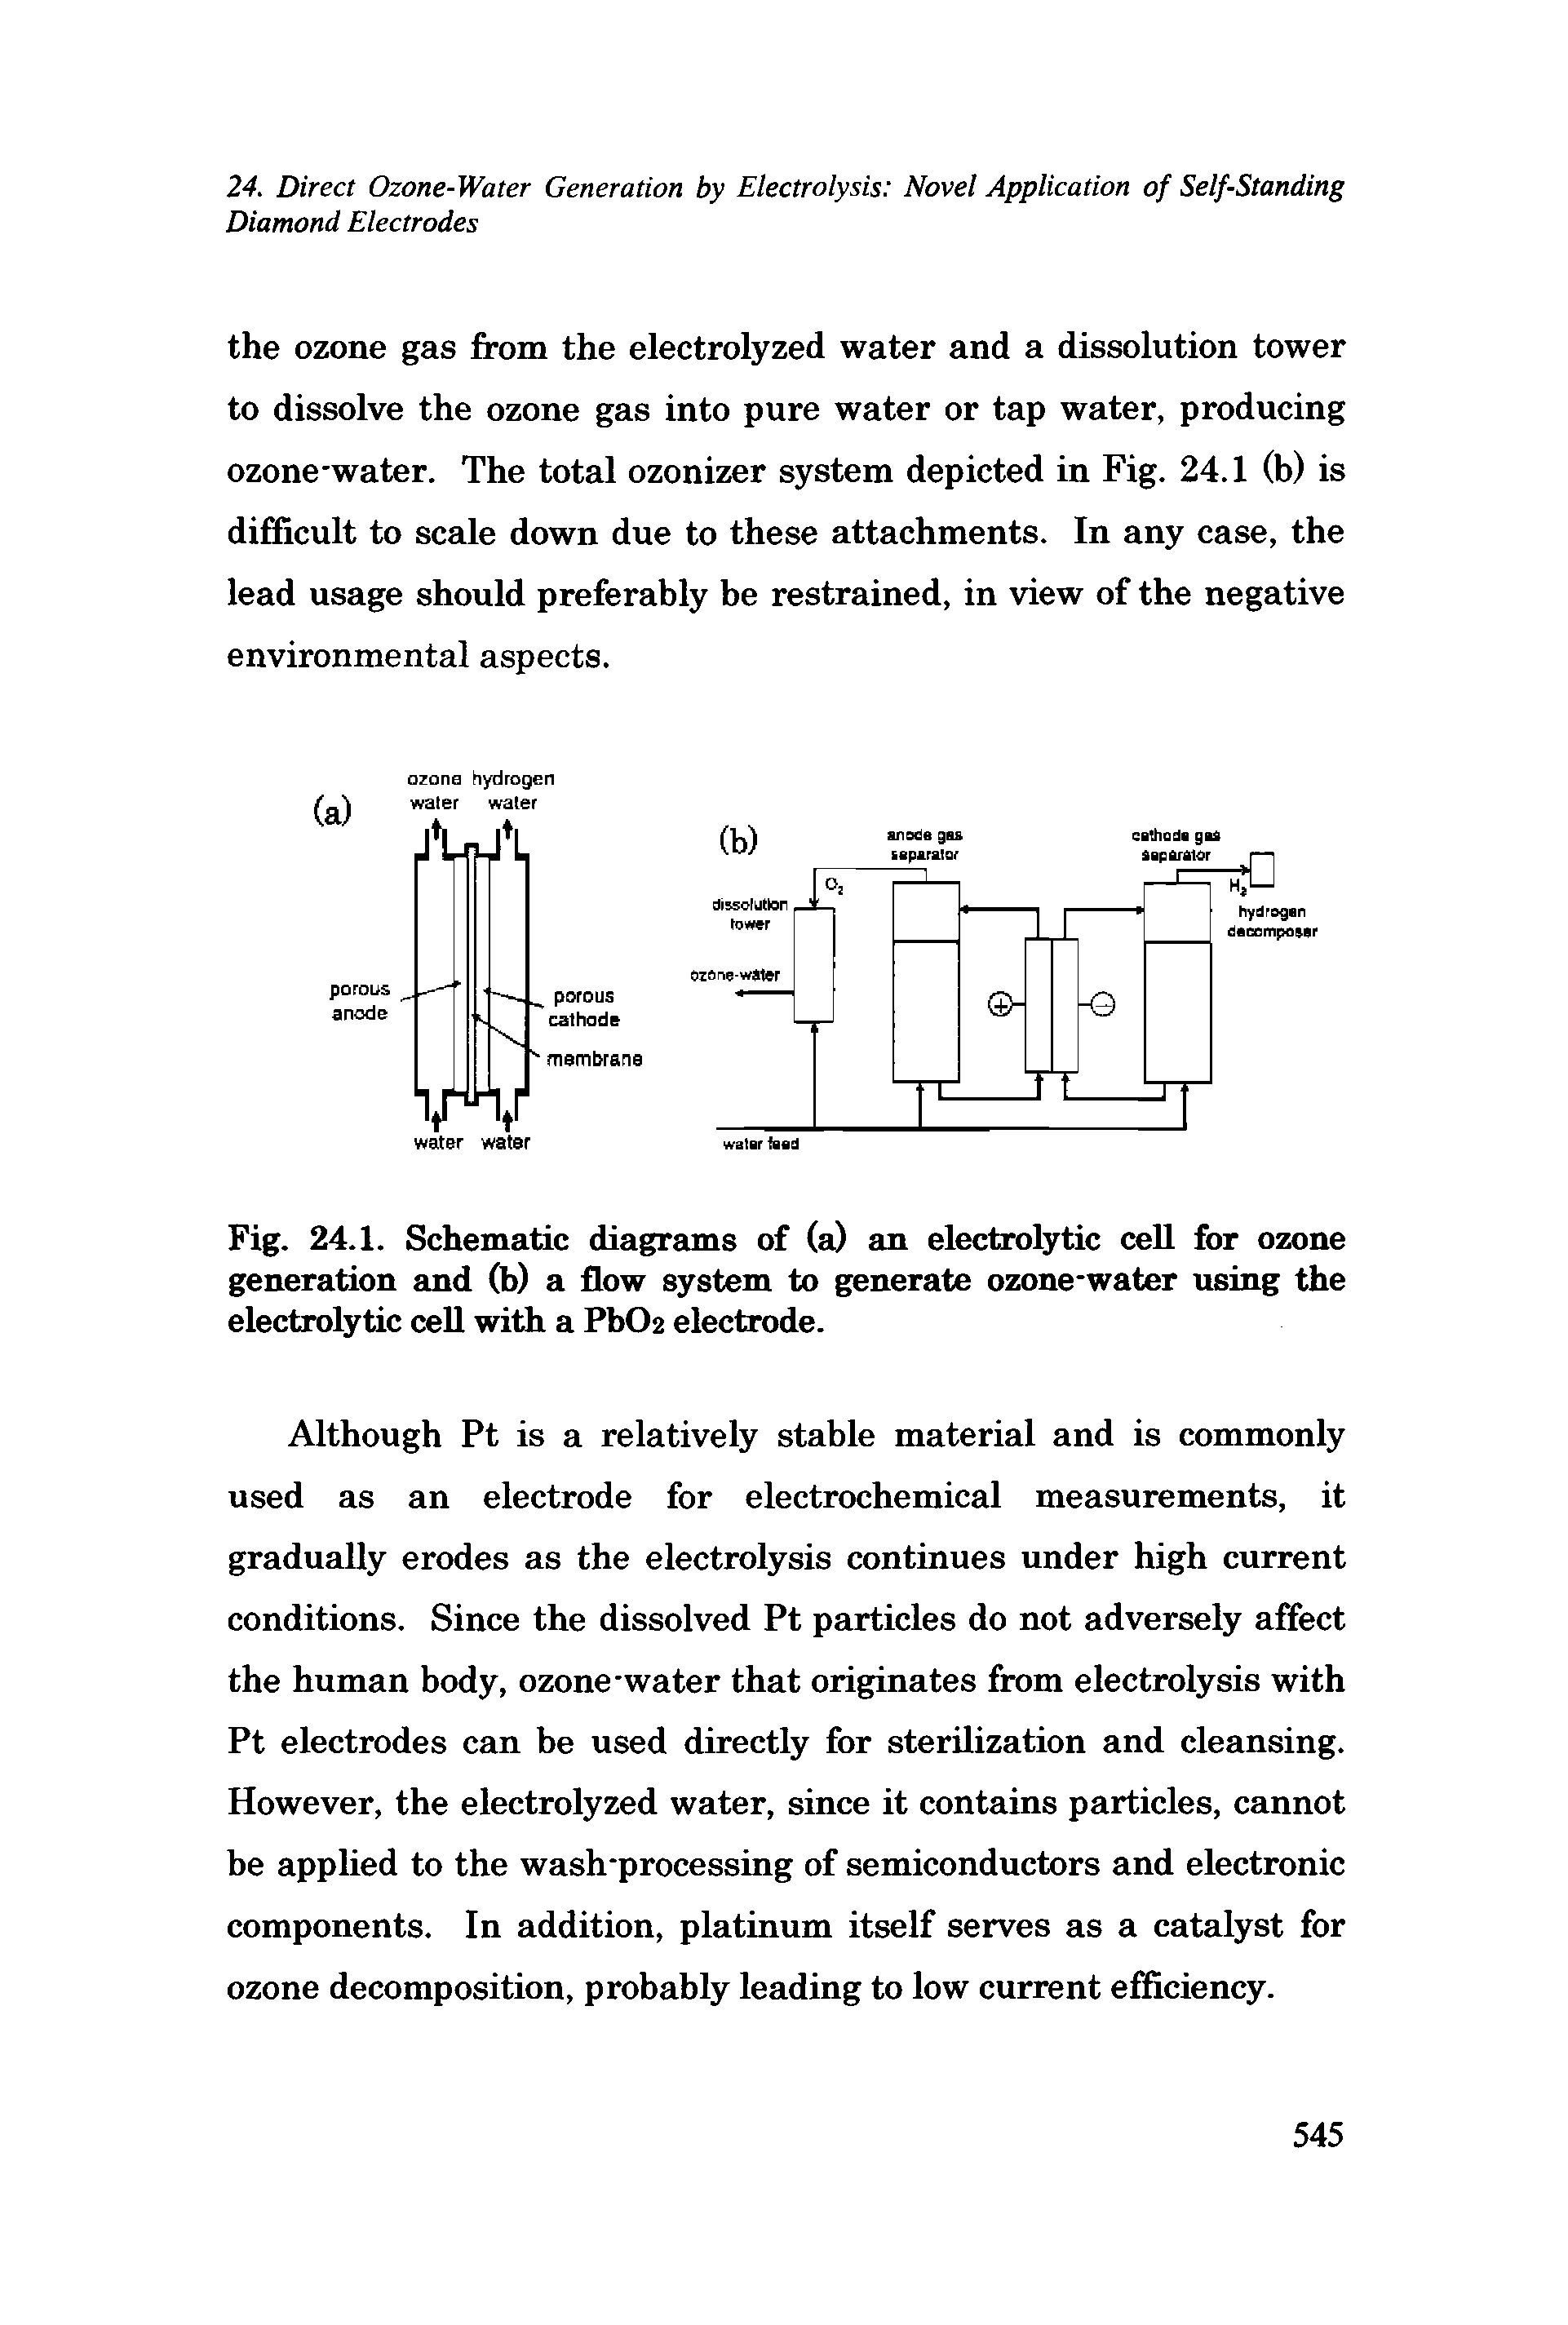 Fig. 24.1. Schematic diagrams of (a) an electrolytic ceU for ozone generation and (b) a flow system to generate ozone-water using the electrolytic cell with a Pb02 electrode.